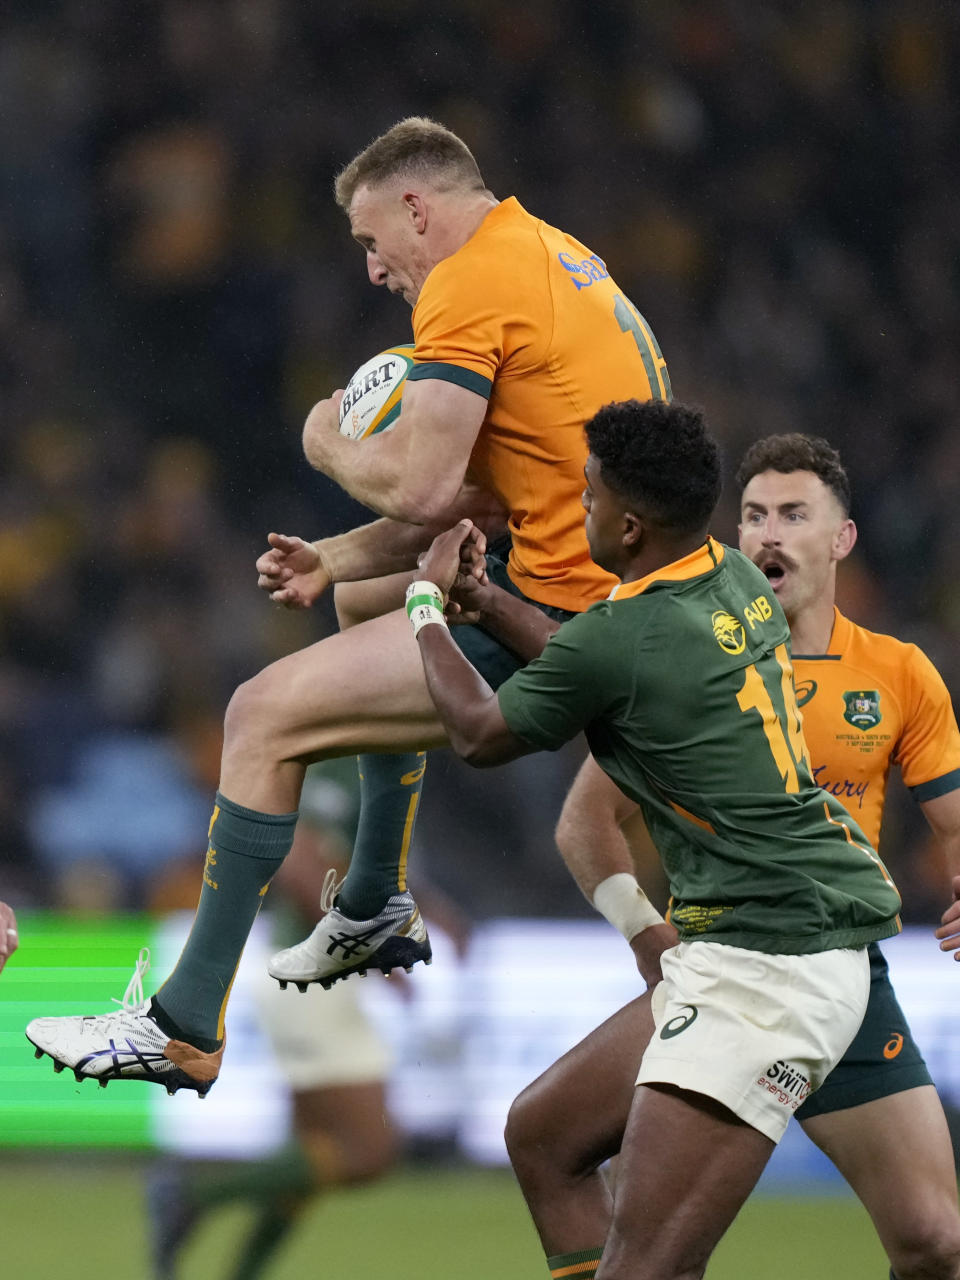 Australia's Reece Hodge, left, gathers in a high ball in front of South Africa's Canan Moodie during their Championship Rugby test match in Sydney, Saturday, Sept. 3, 2022. (AP Photo/Rick Rycroft)